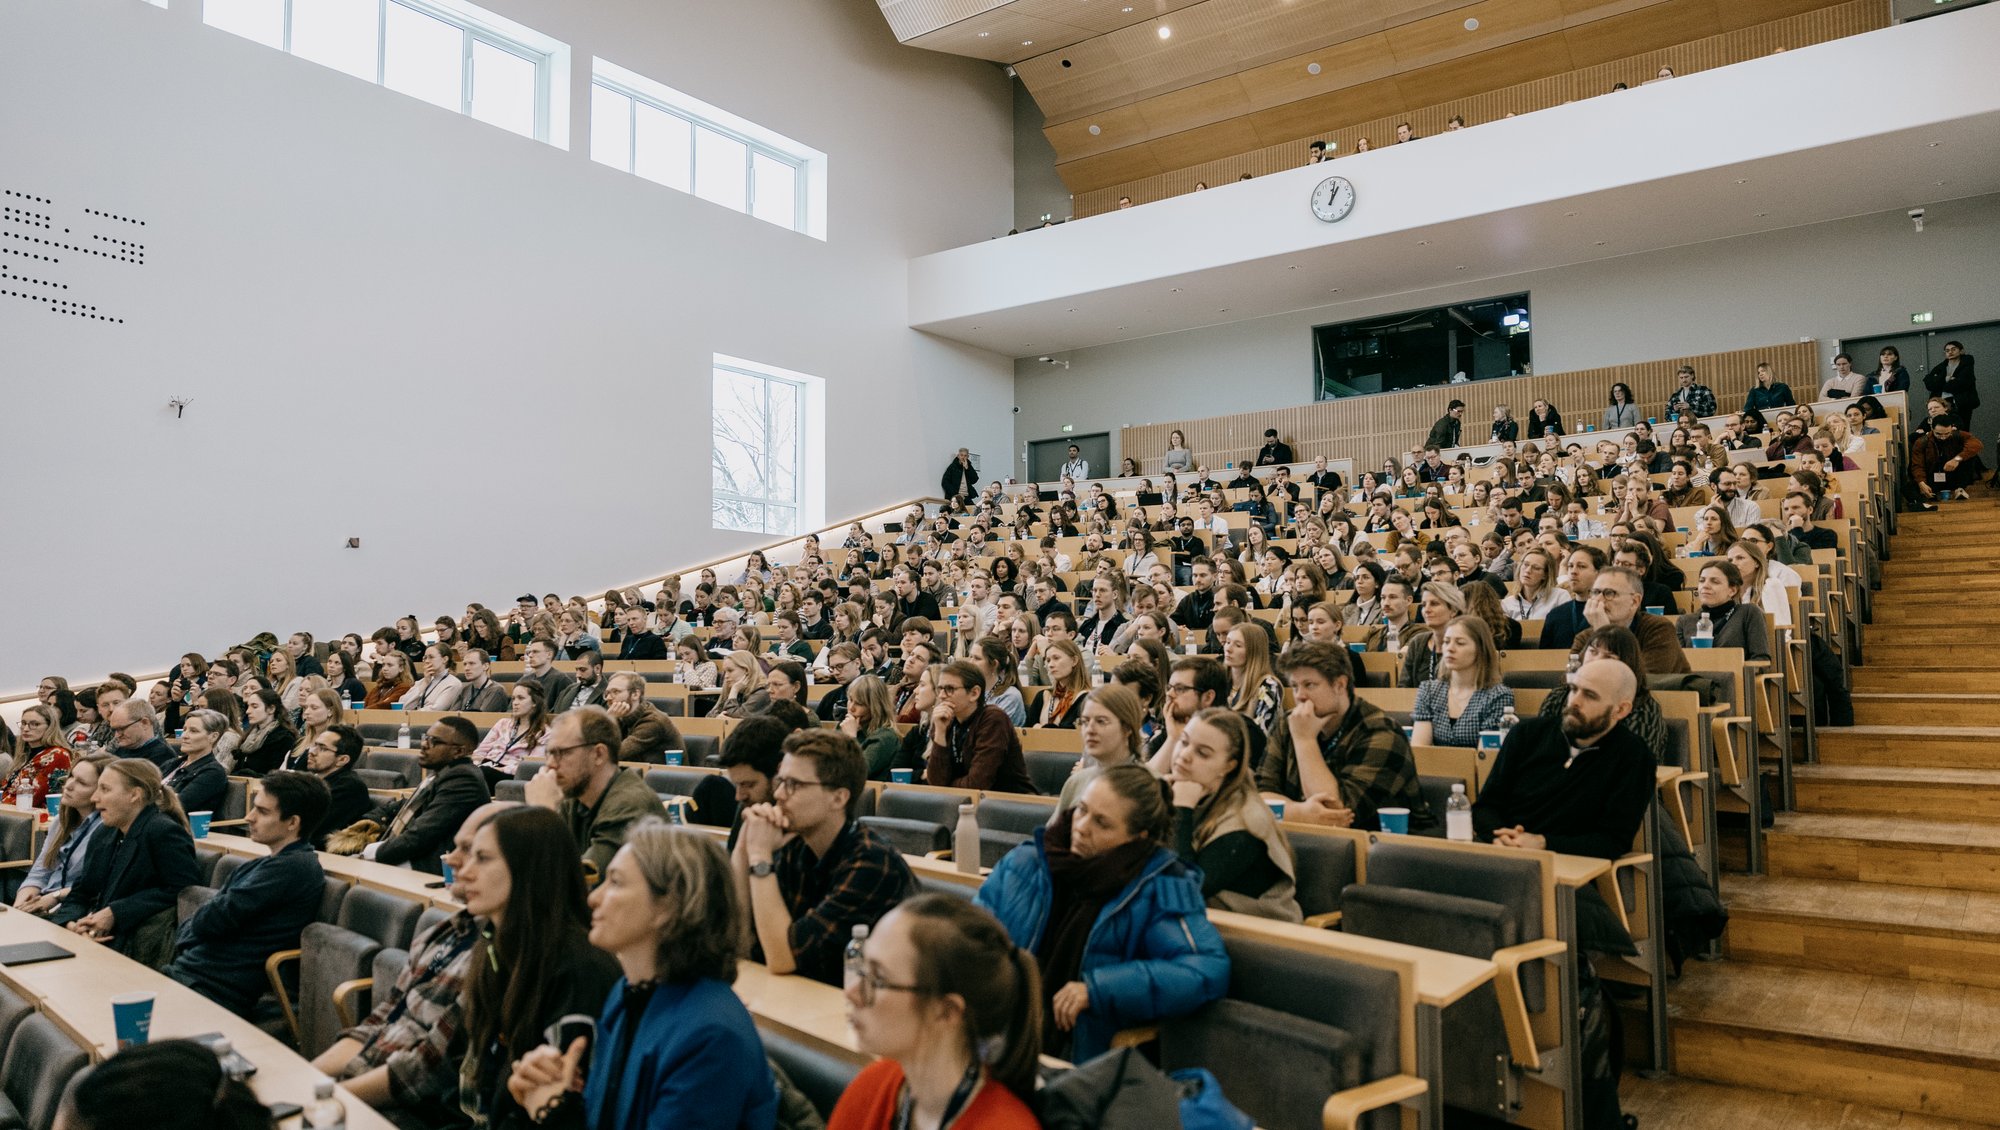 Even past noon, there is still a good turnout in the seats at the Per Kirkeby Auditorium. Photo: Jens Hartmann Schmidt, AU Photo.